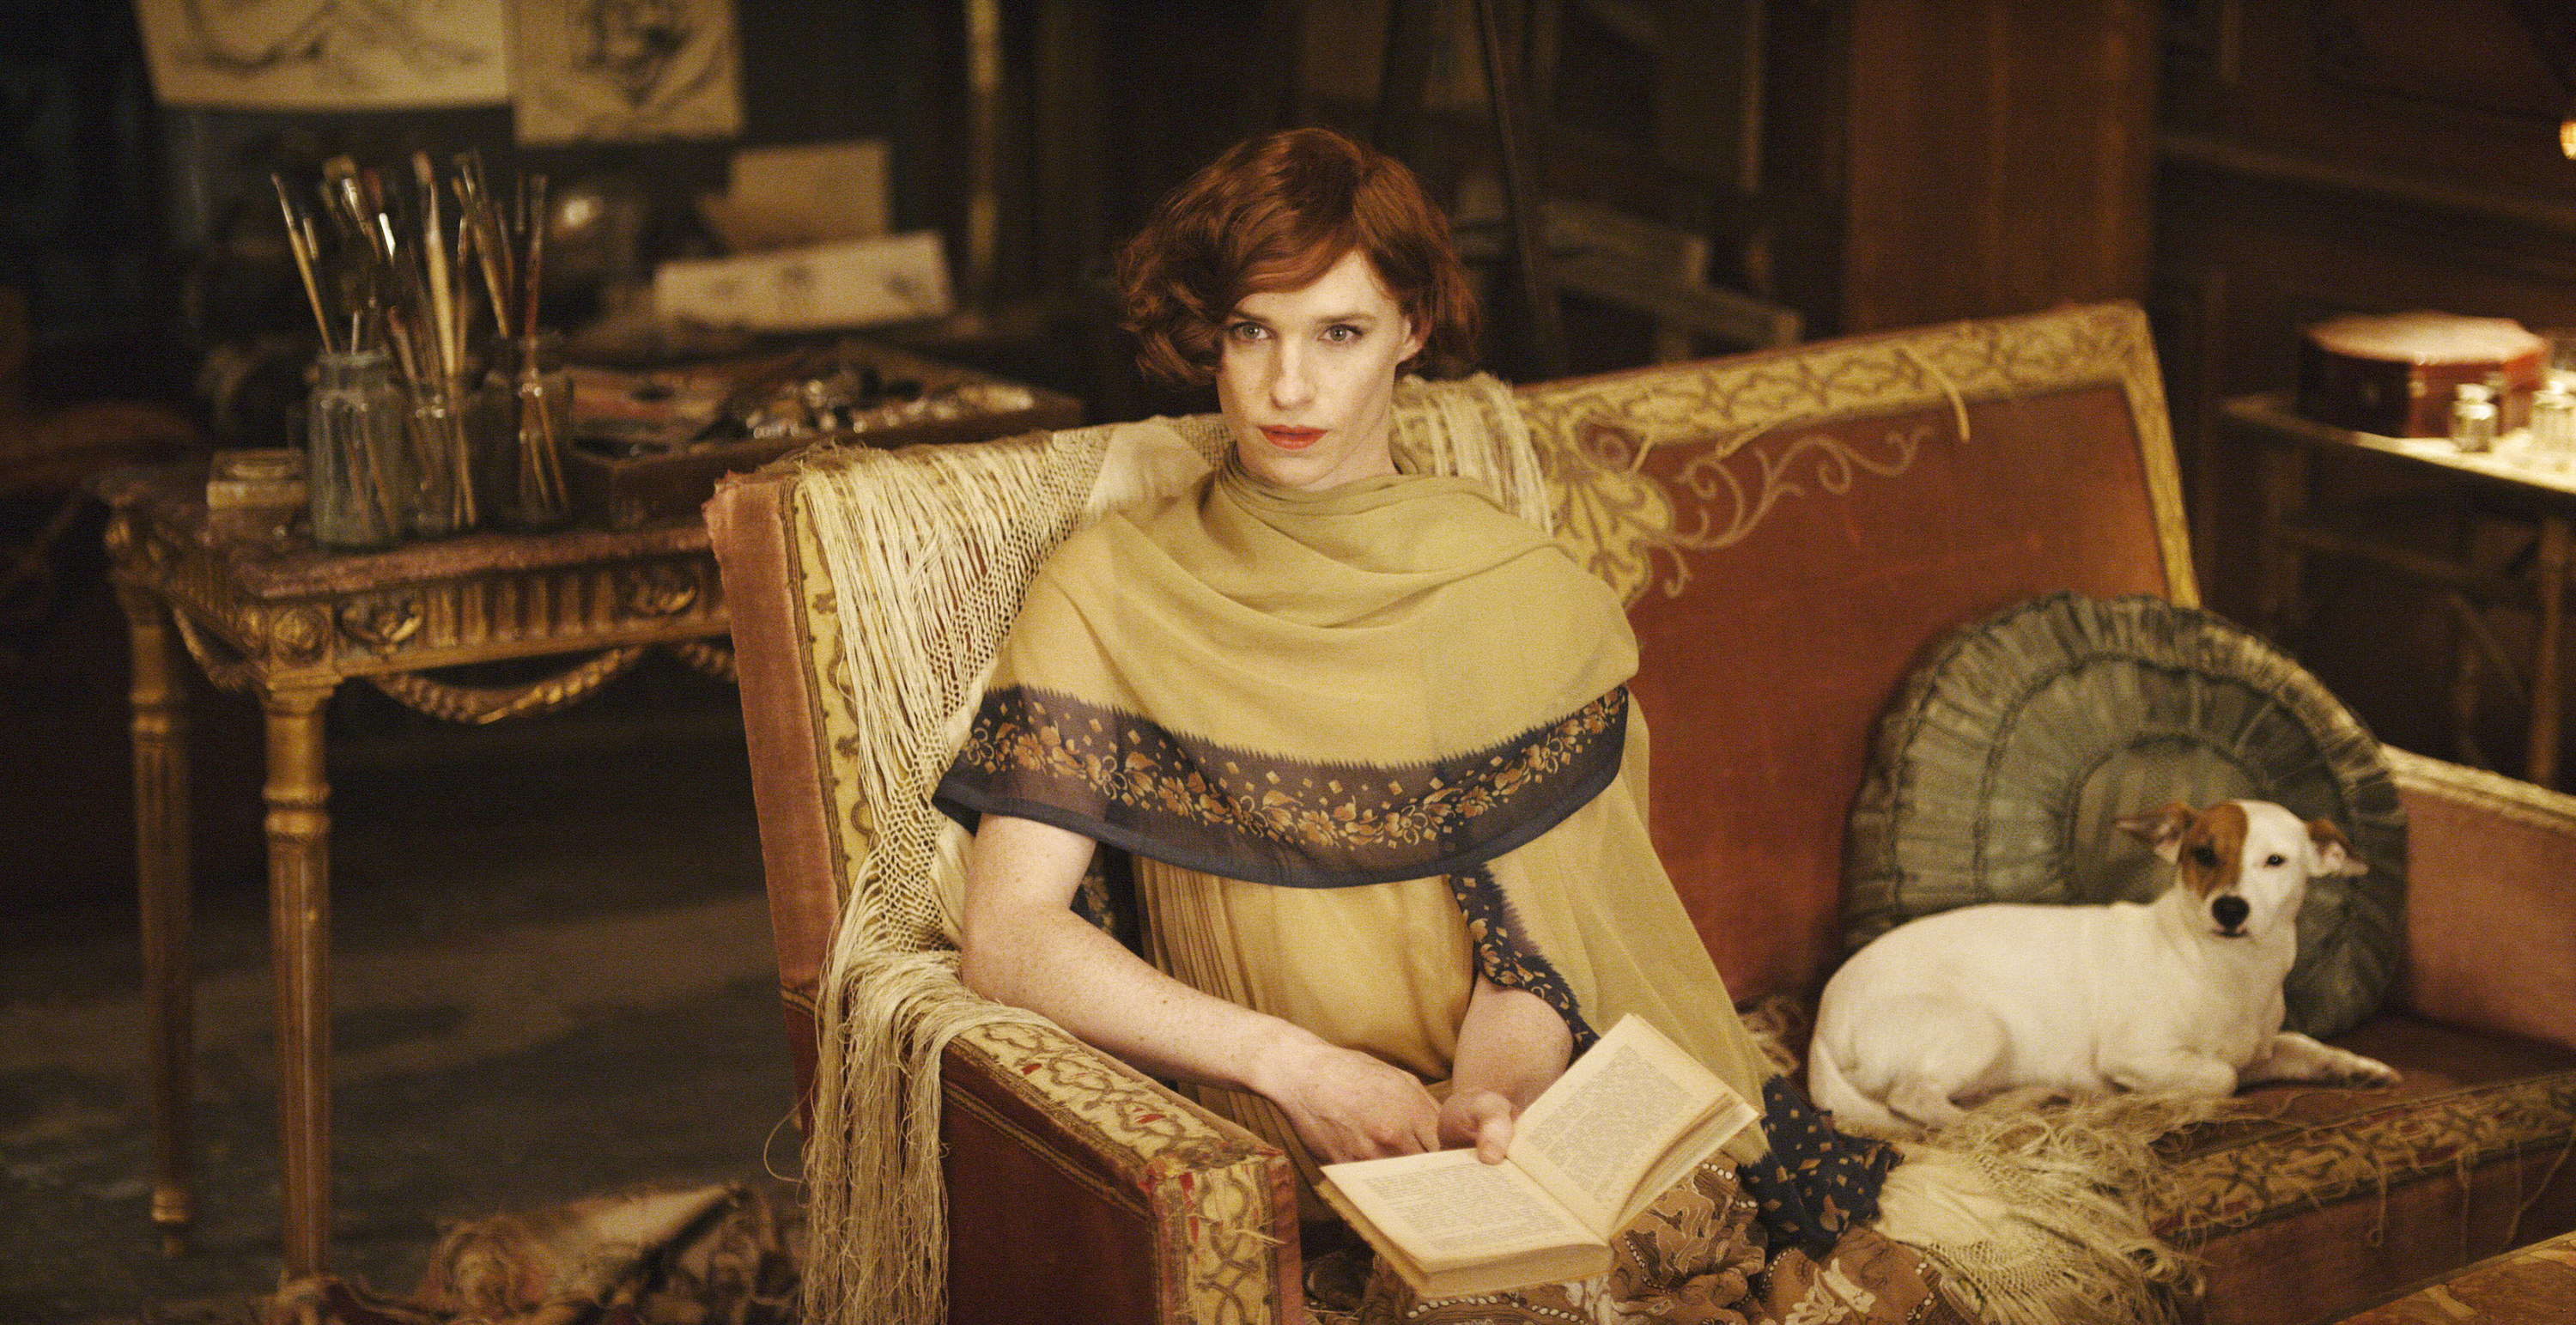 Eddie Redmayne as Lili Elbe, reading in a dress on her couch next to her dog. 